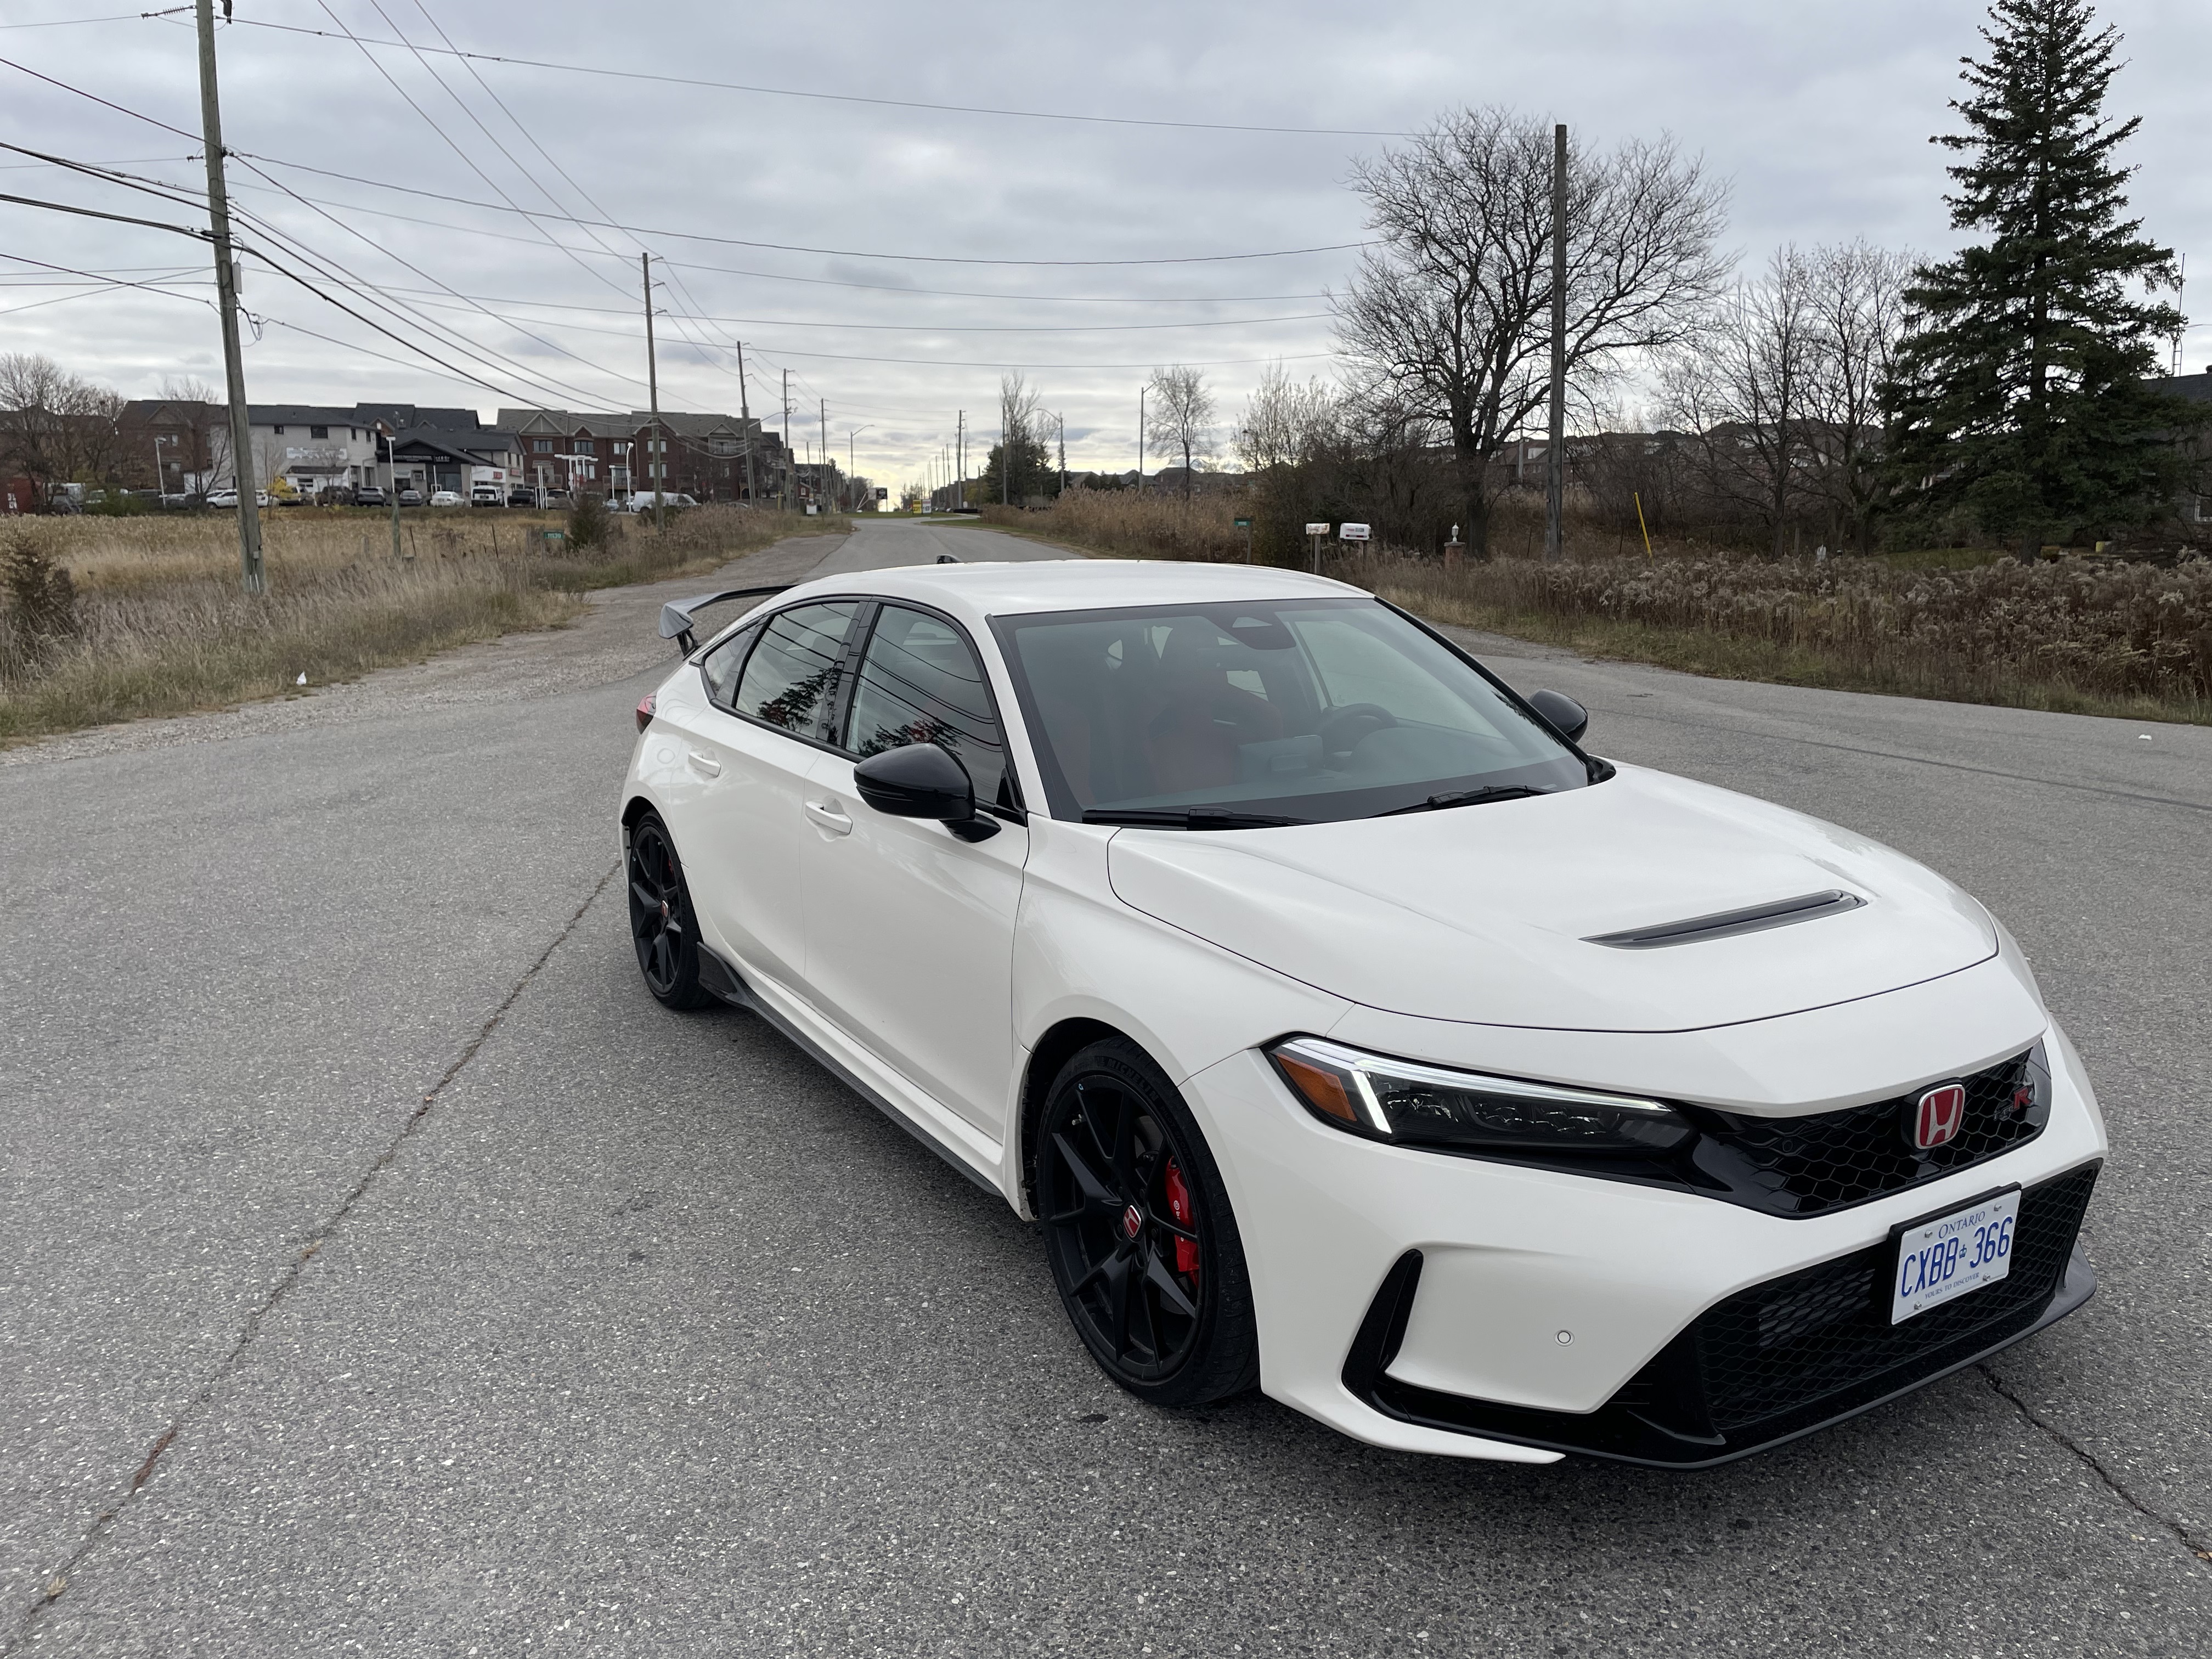 The 2023 Honda Civic Type R Review: A Hot Hatch of the Highest Order